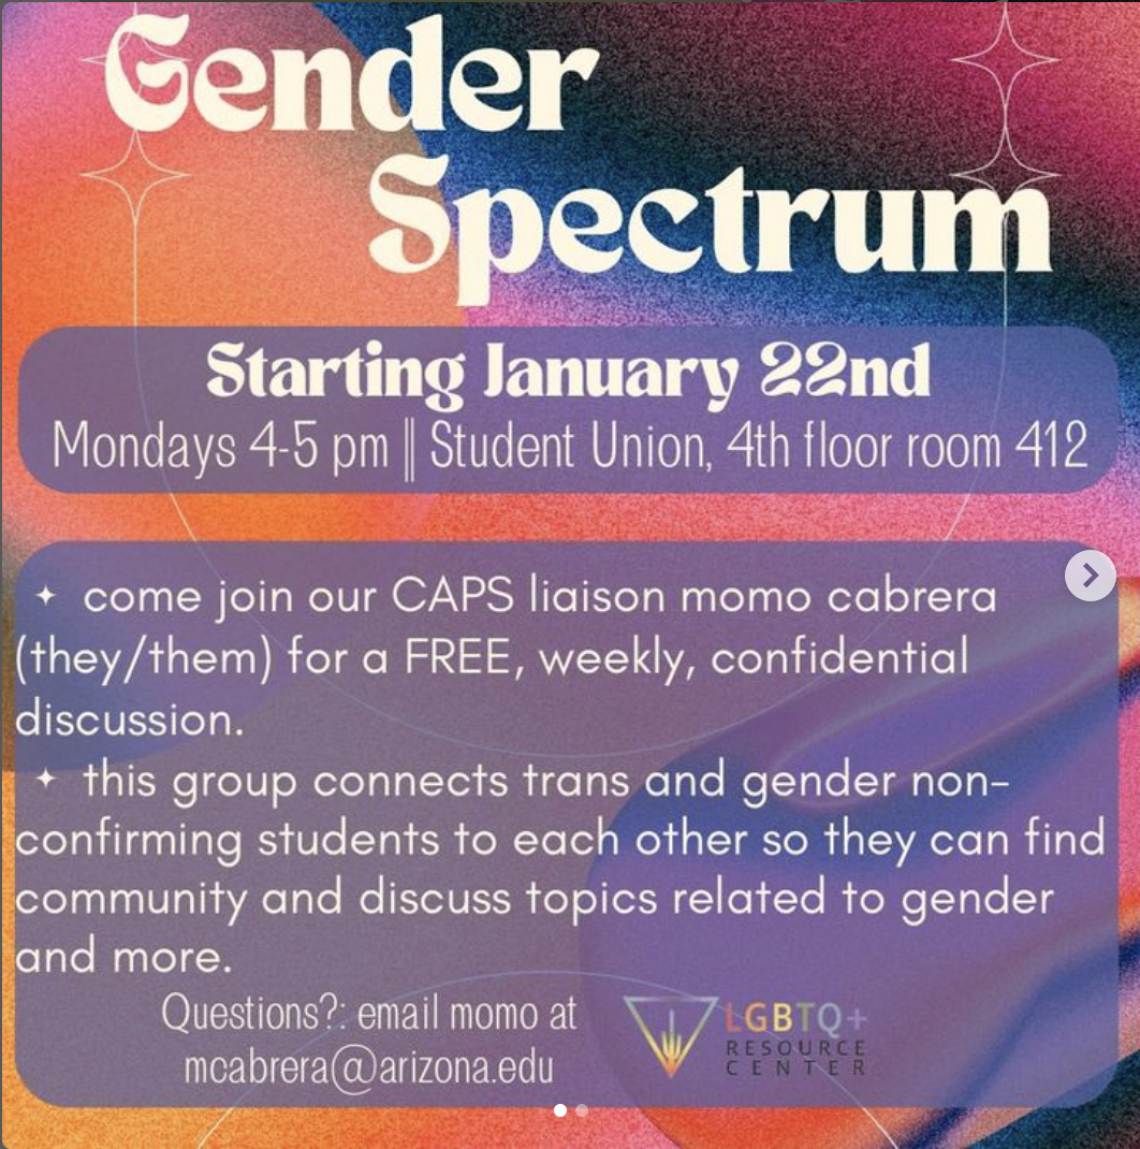 rainbow background with white writing and start decorations. Title text: GENDER SPECTRUM. Content text: Starting January 22nd. Mondays 4-5pm. Student Union. 4th floor. Room 412. Come join our CAPS liaison moms camera (they/them) for a FREE weekly confidential discussion. This group connects trans and gender nonconforming students to each other so they can find community and discuss topics related to gender and more.